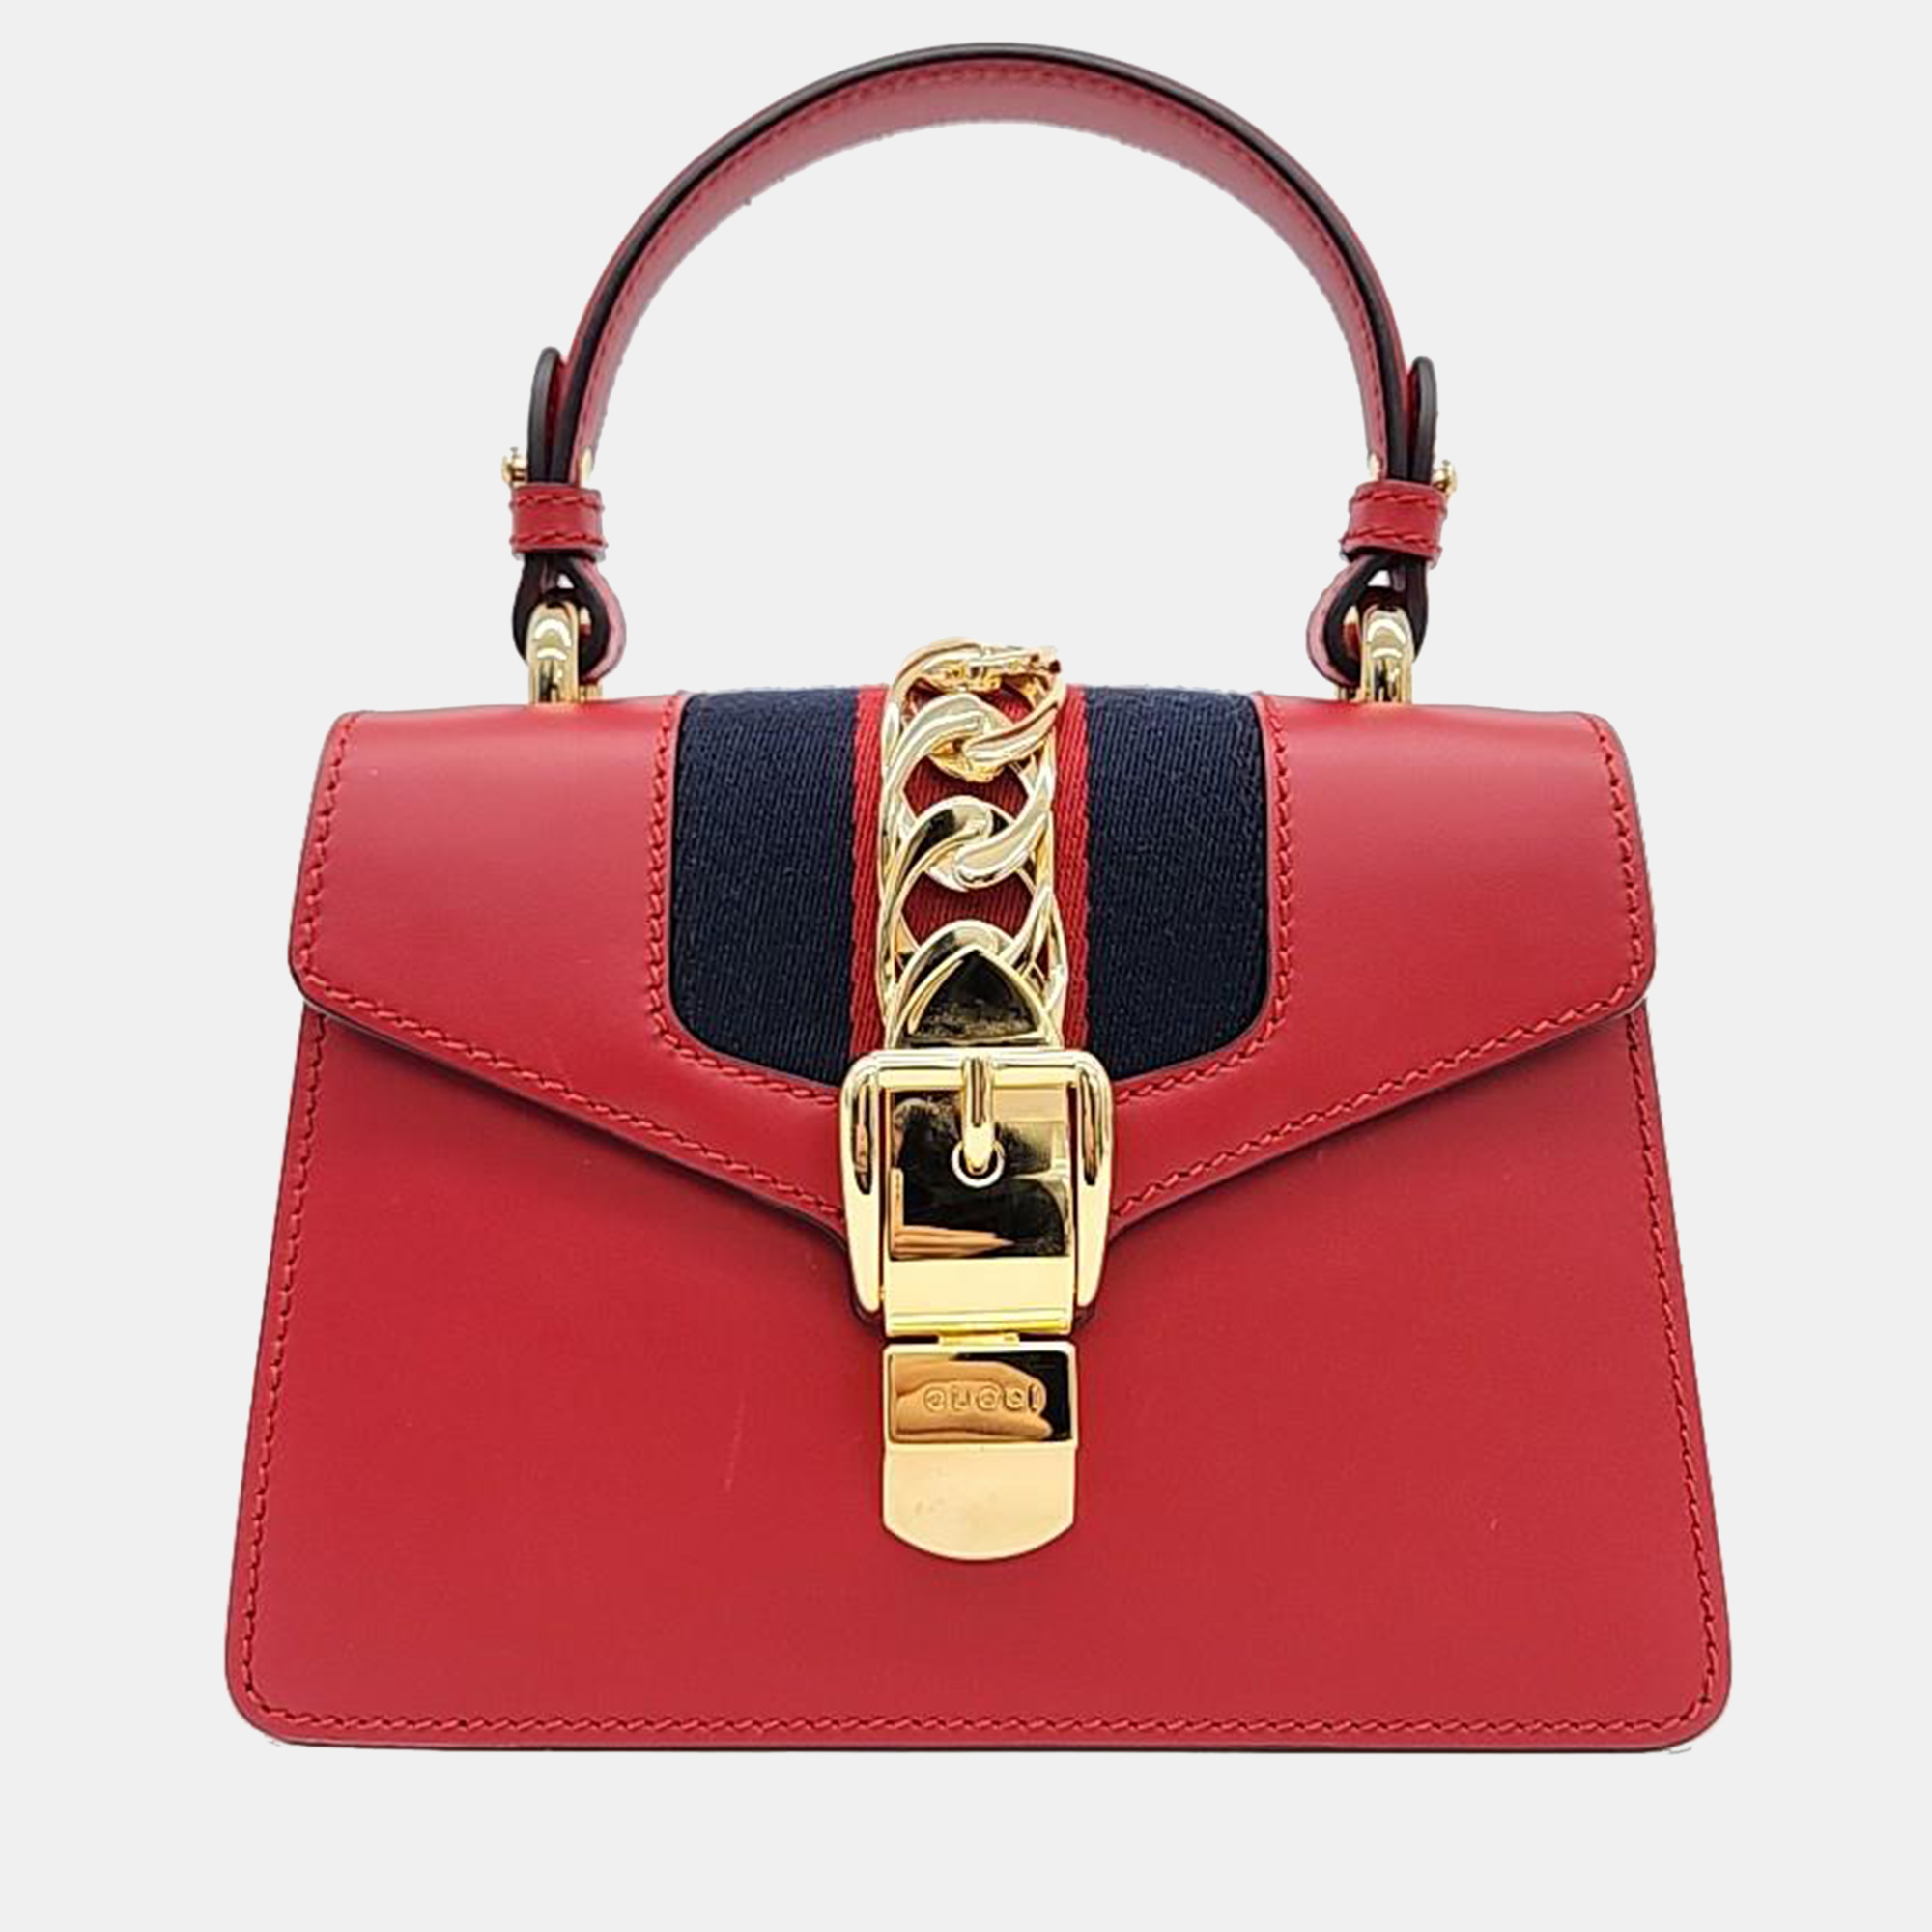 Gucci red leather mini sylvie top handle bag